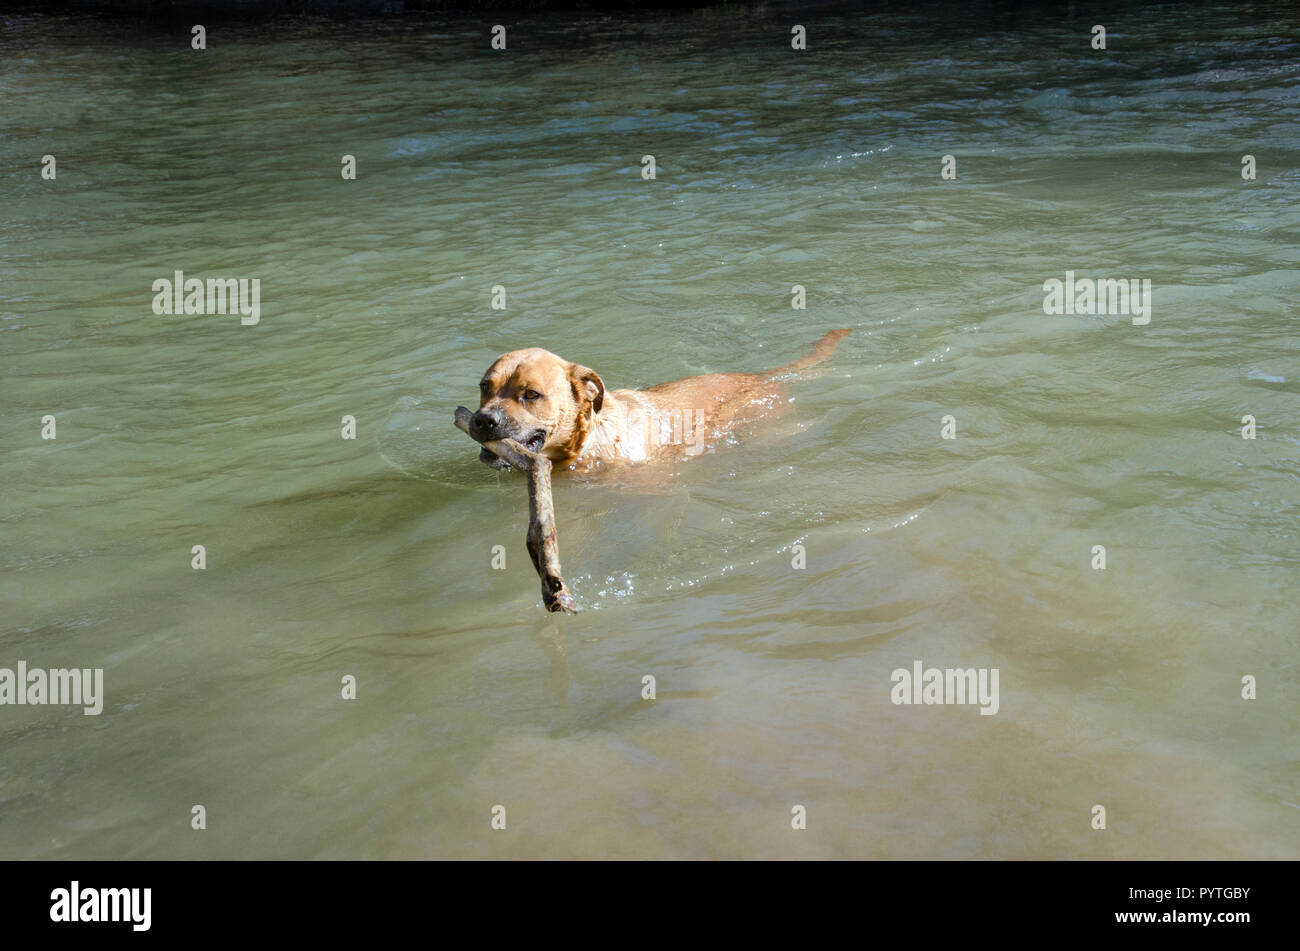 A boxer dog swimming and carrying a large stick Stock Photo